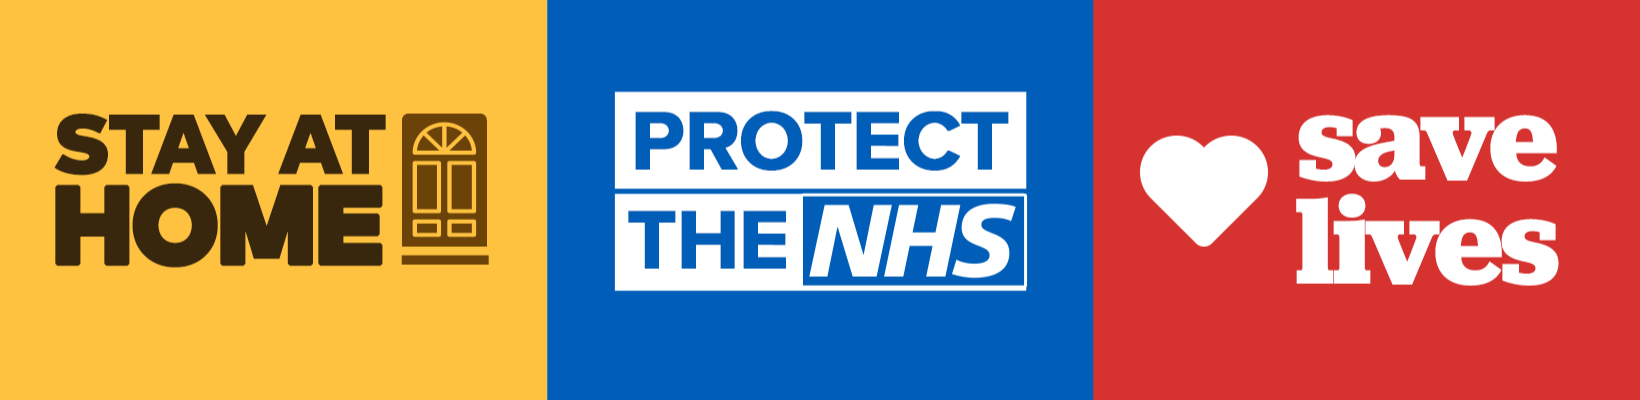 Stay Home - Protect the NHS - Save Lives